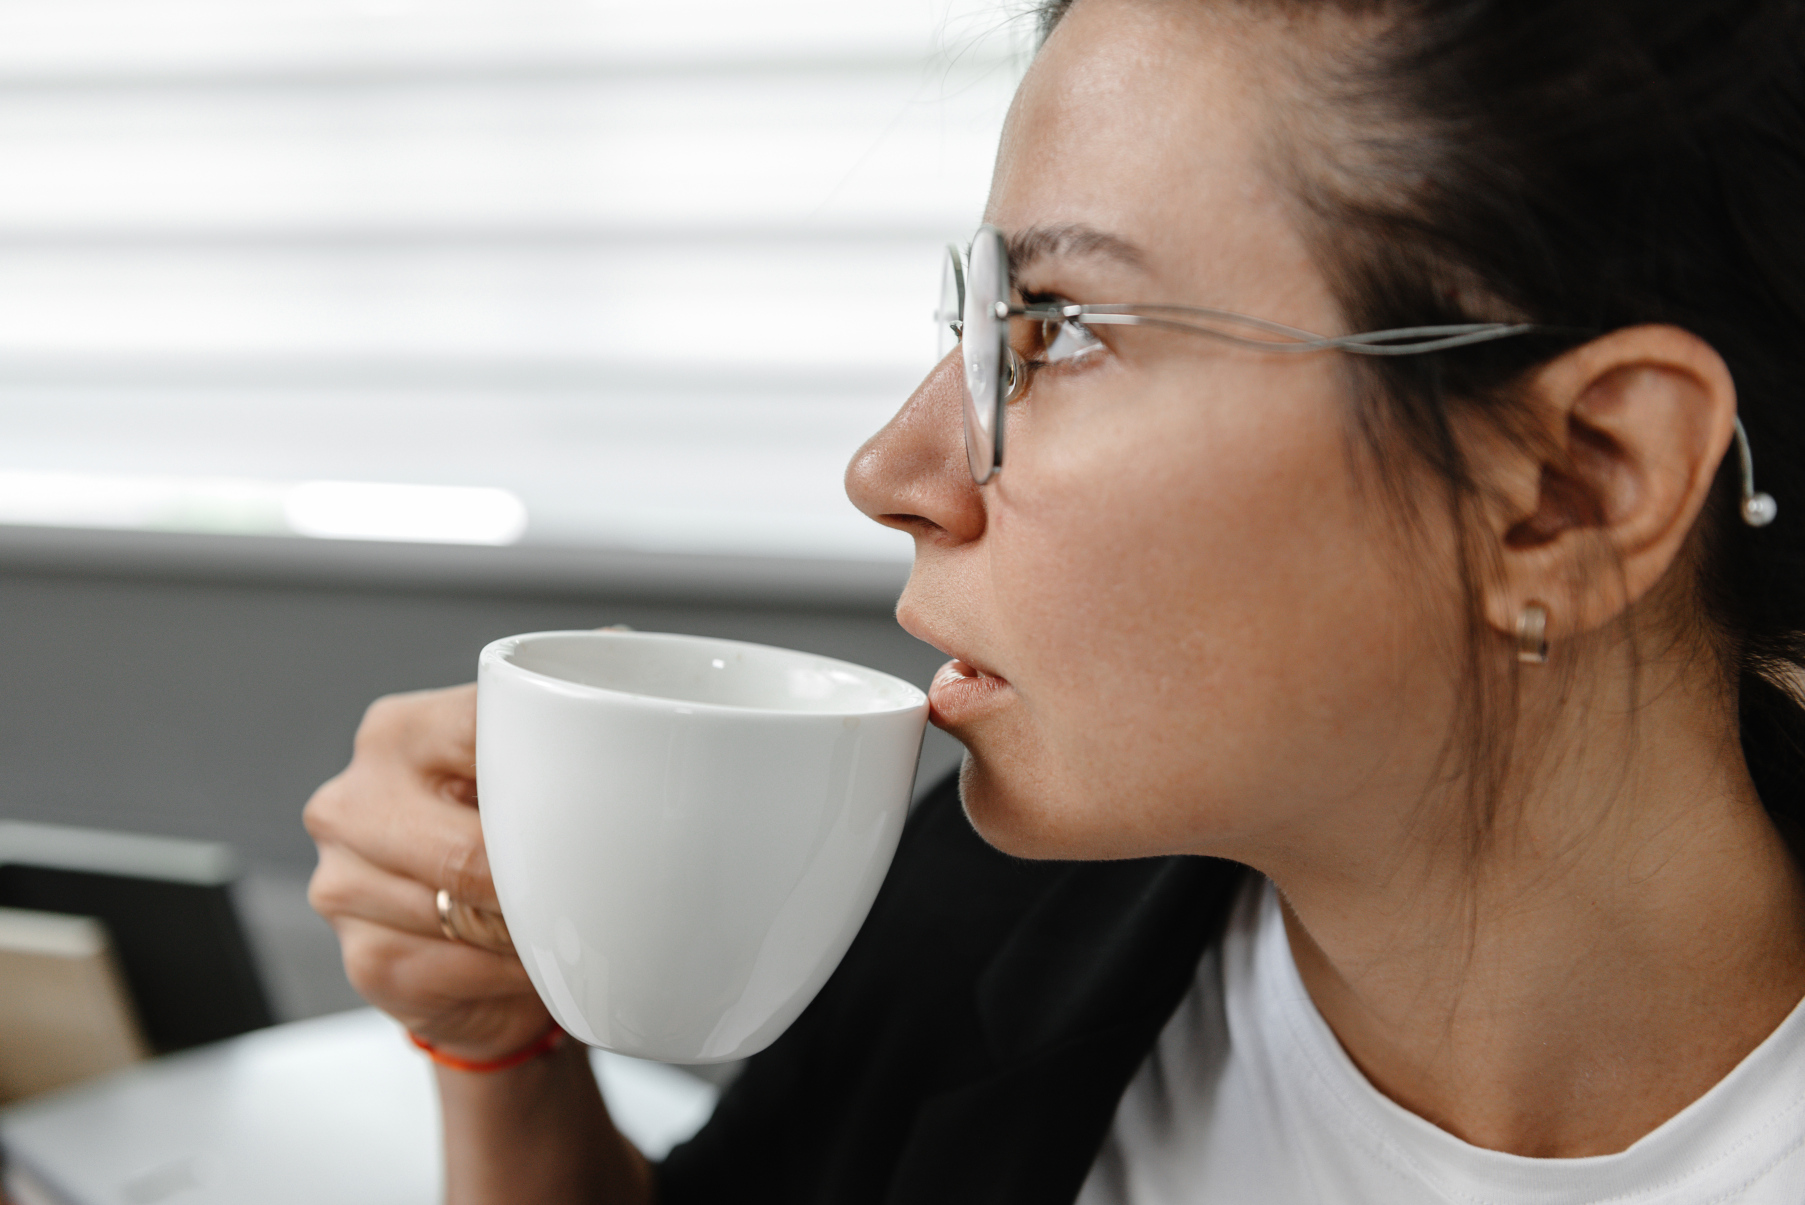 A girl drinks coffee in the office and thinks. A girl is thinking, a break in her work. The employee in the office is not smiling and drinking coffee